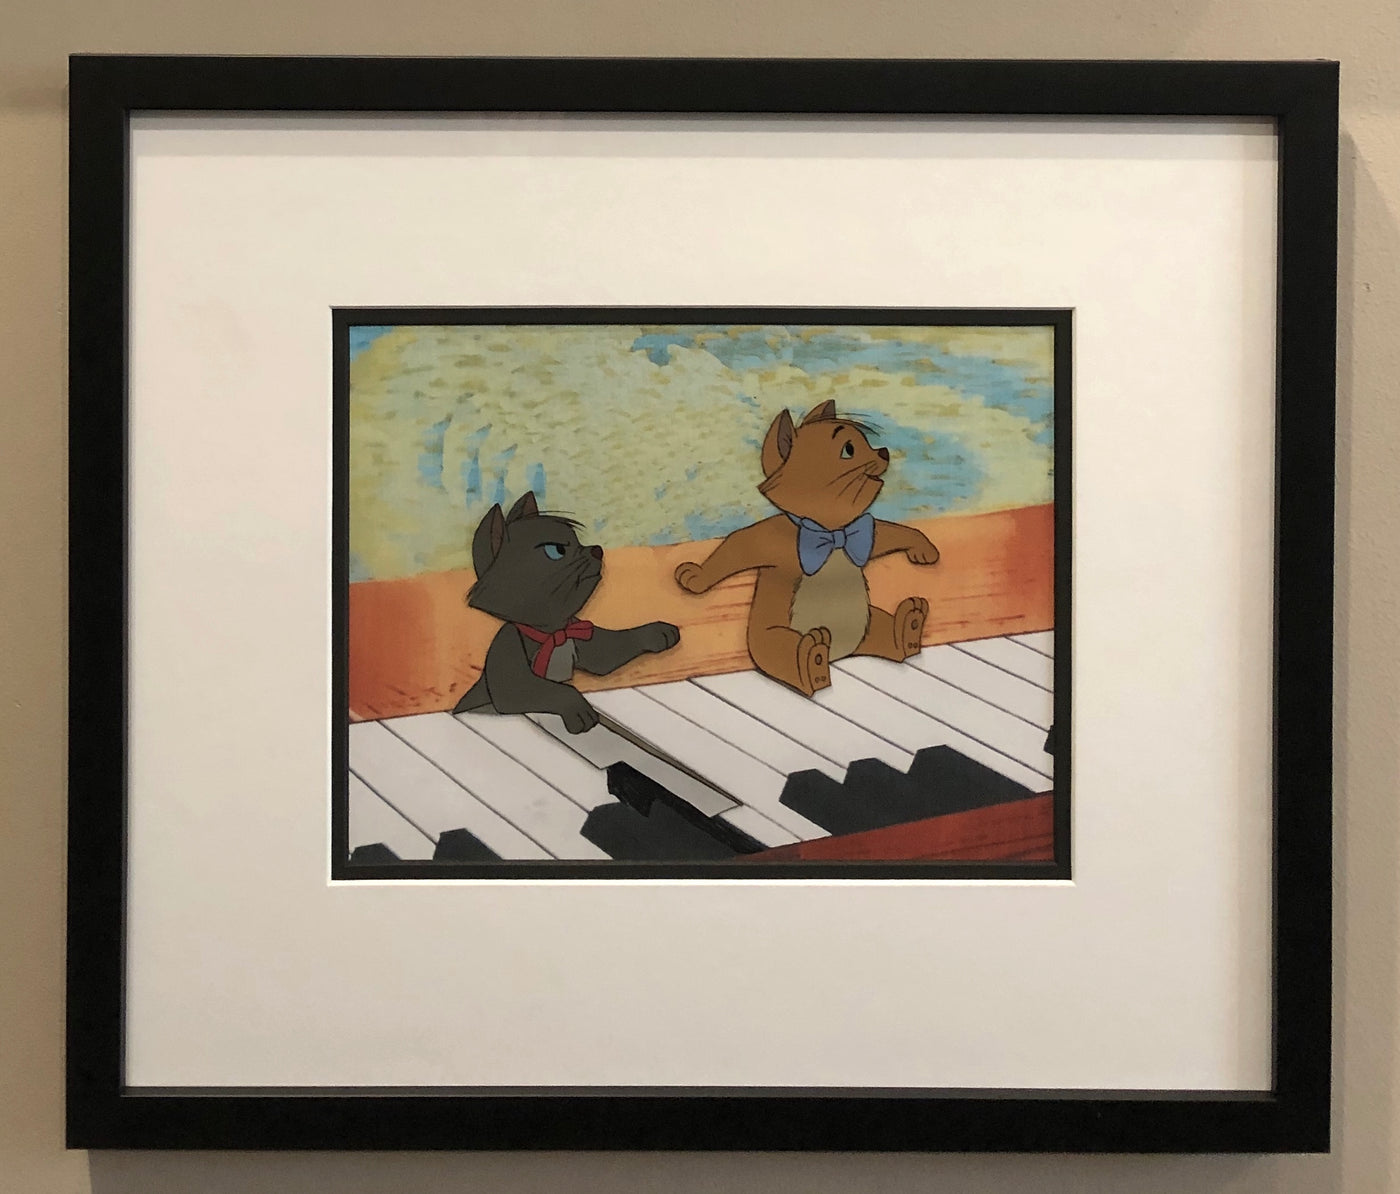 Original Walt Disney Production Cel from The Aristocats featuring Berlioz and Toulouse